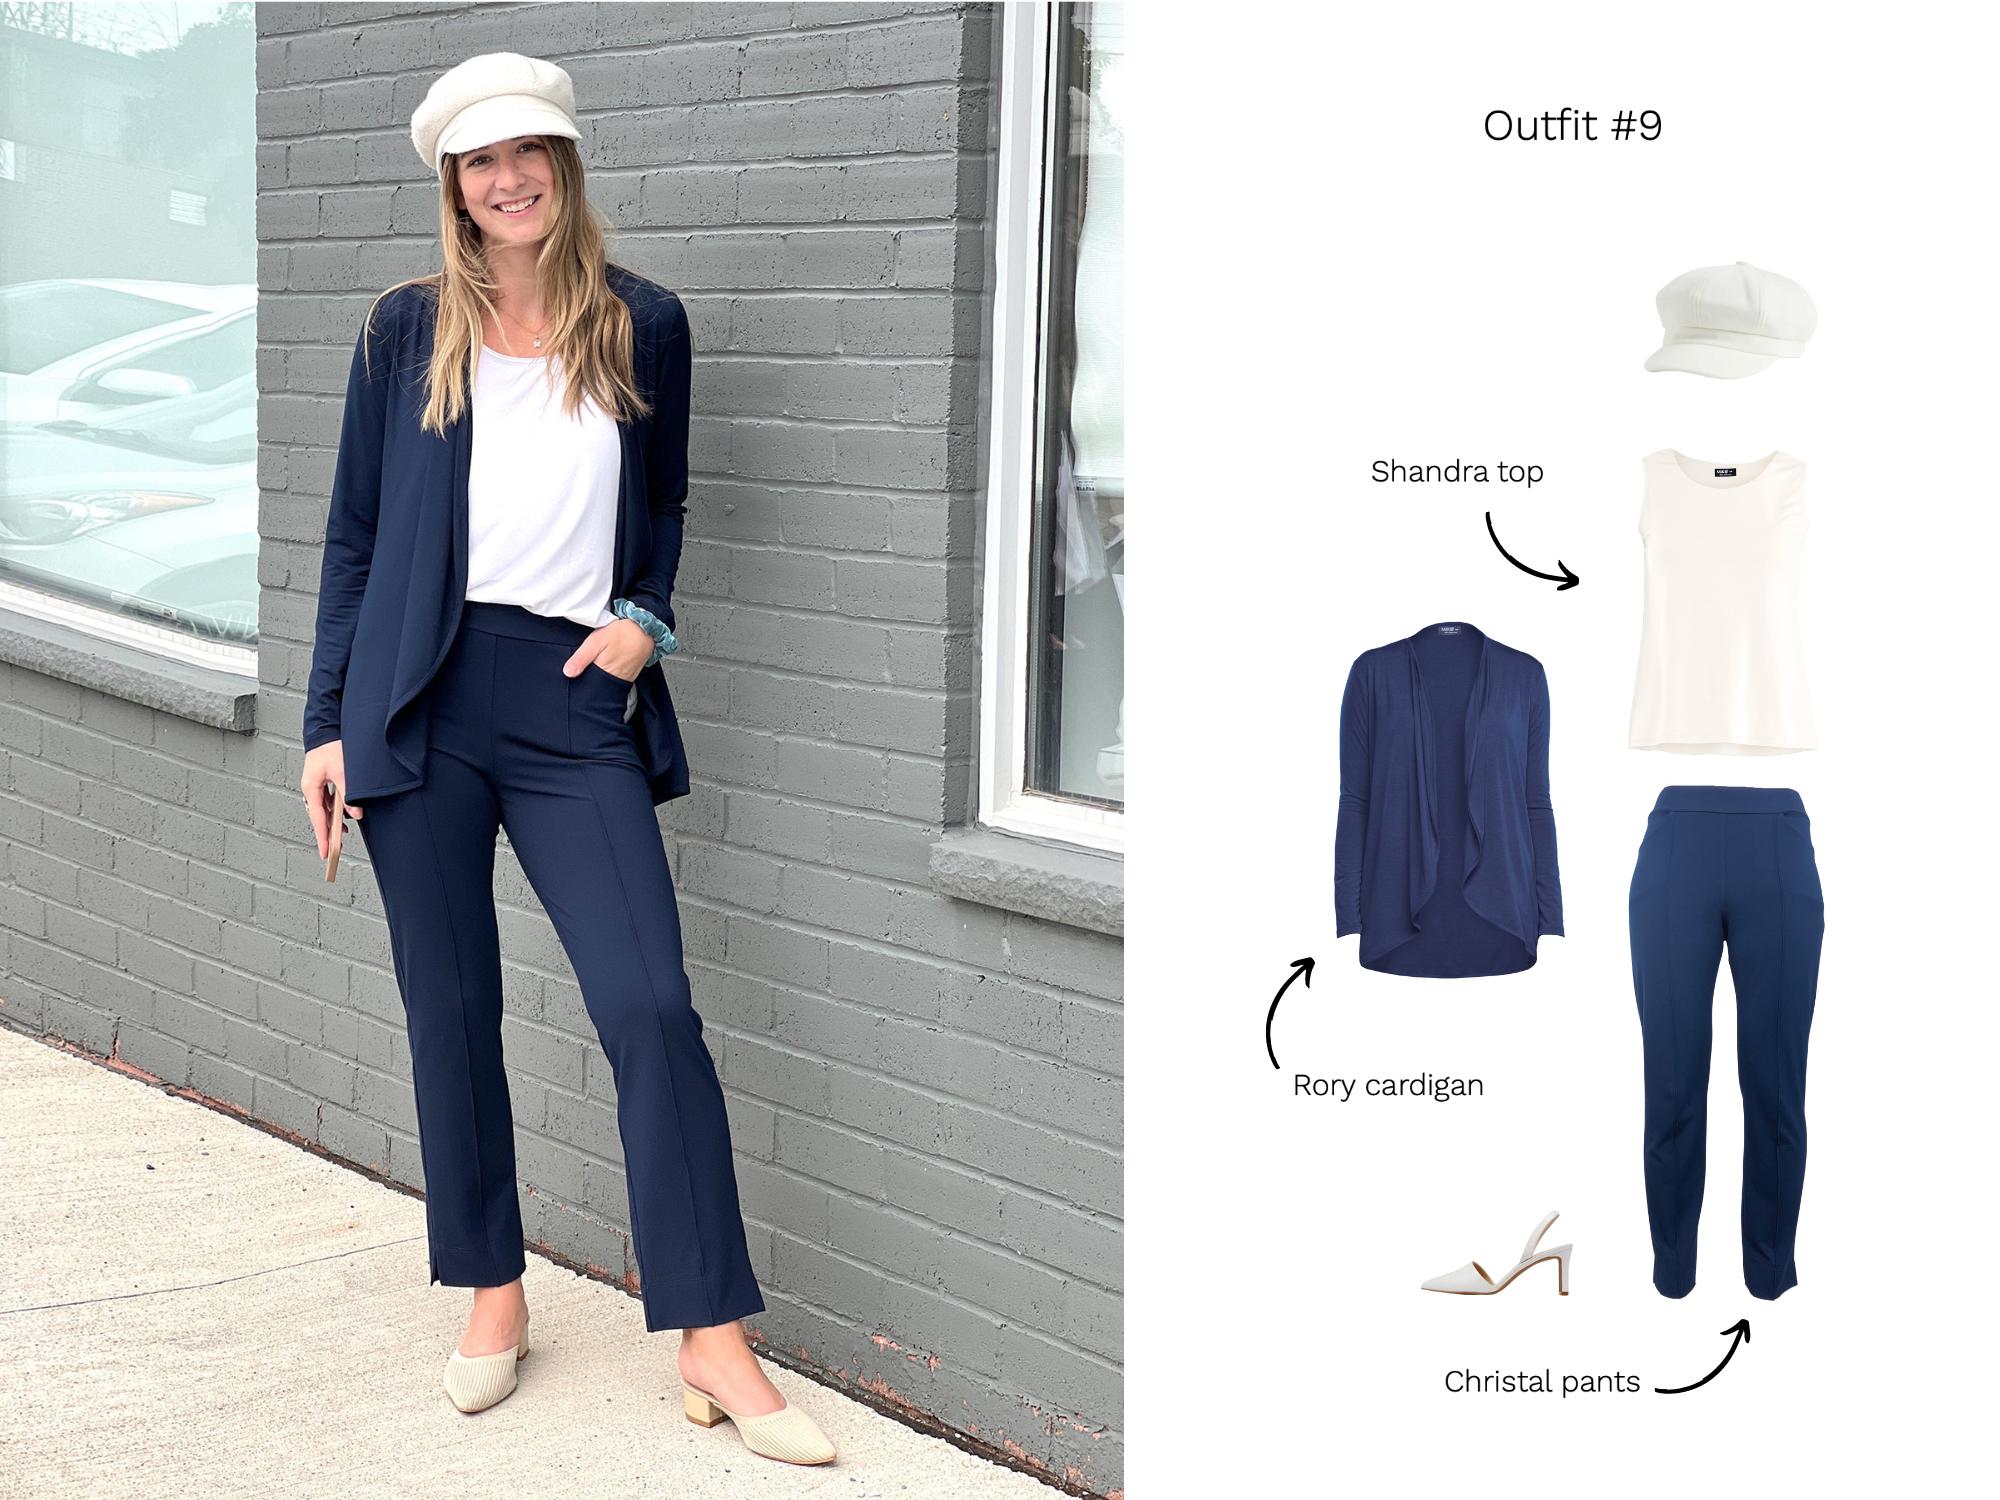 Outfit inspirations for how to style dress pants